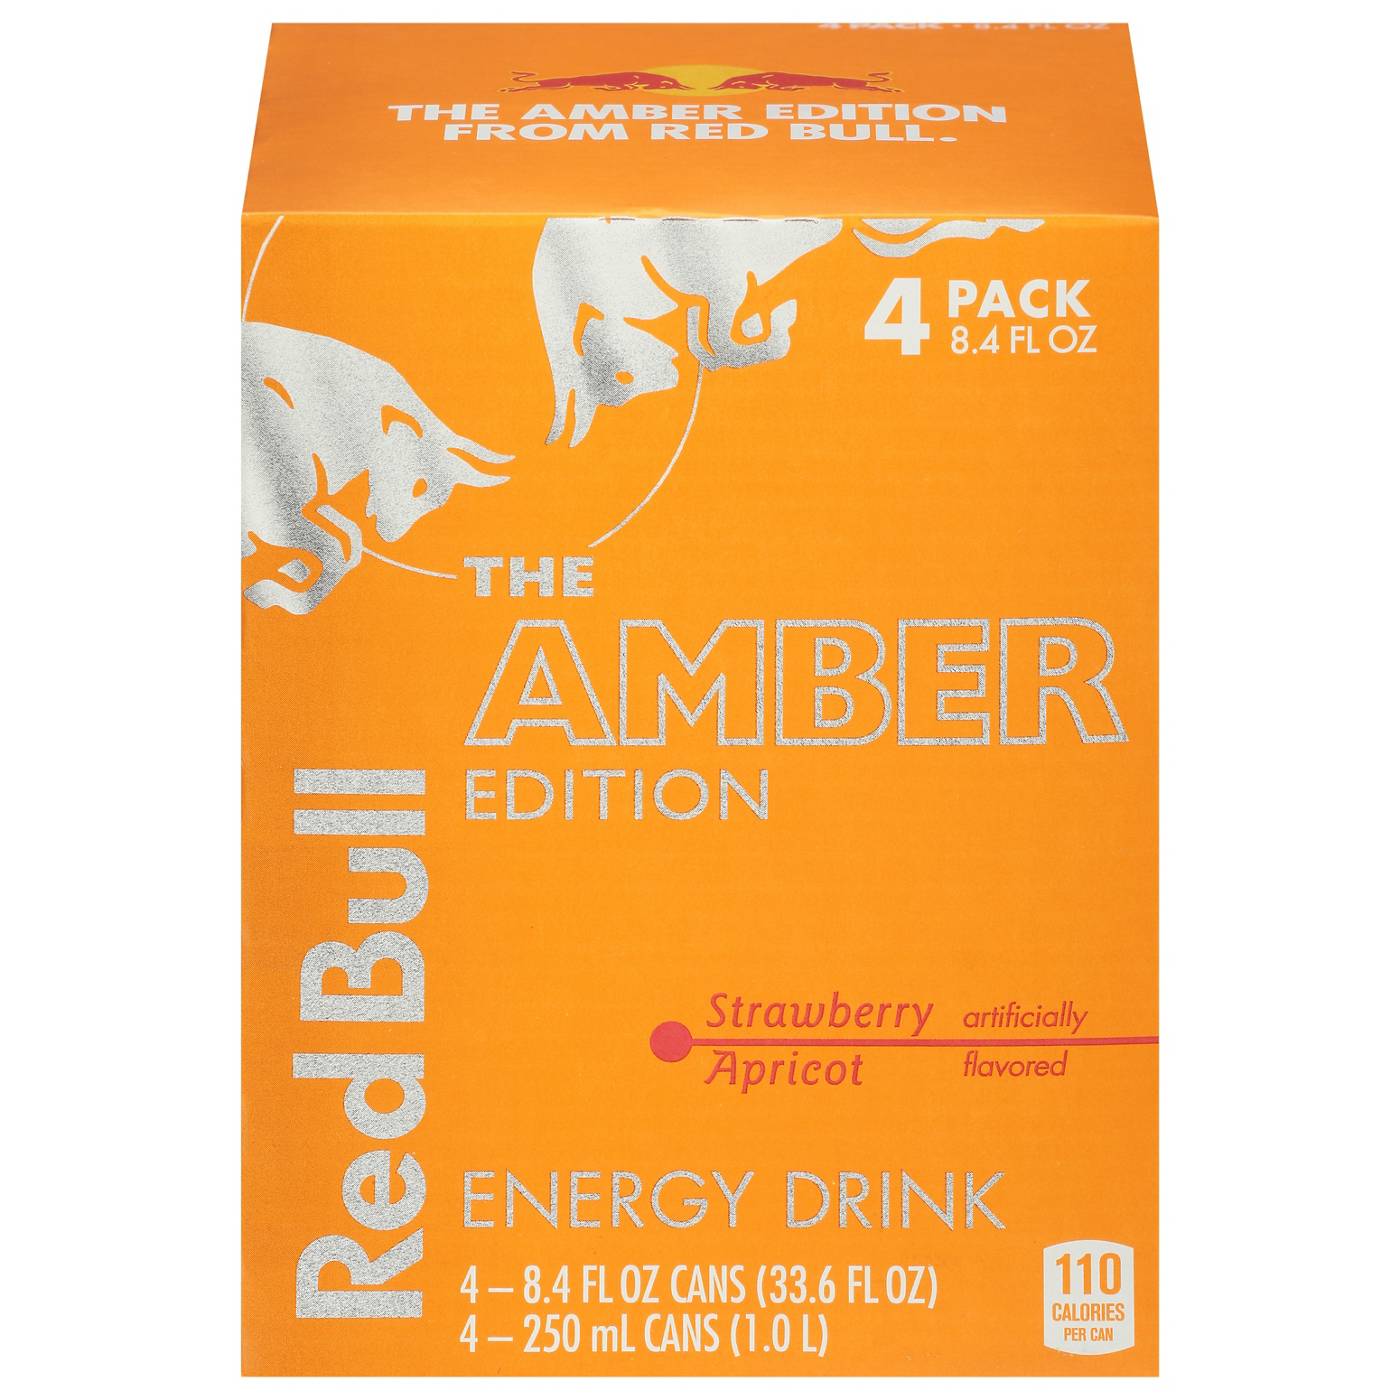 Red Bull The Amber Edition Strawberry Apricot Energy Drink 4 pk Cans; image 1 of 7